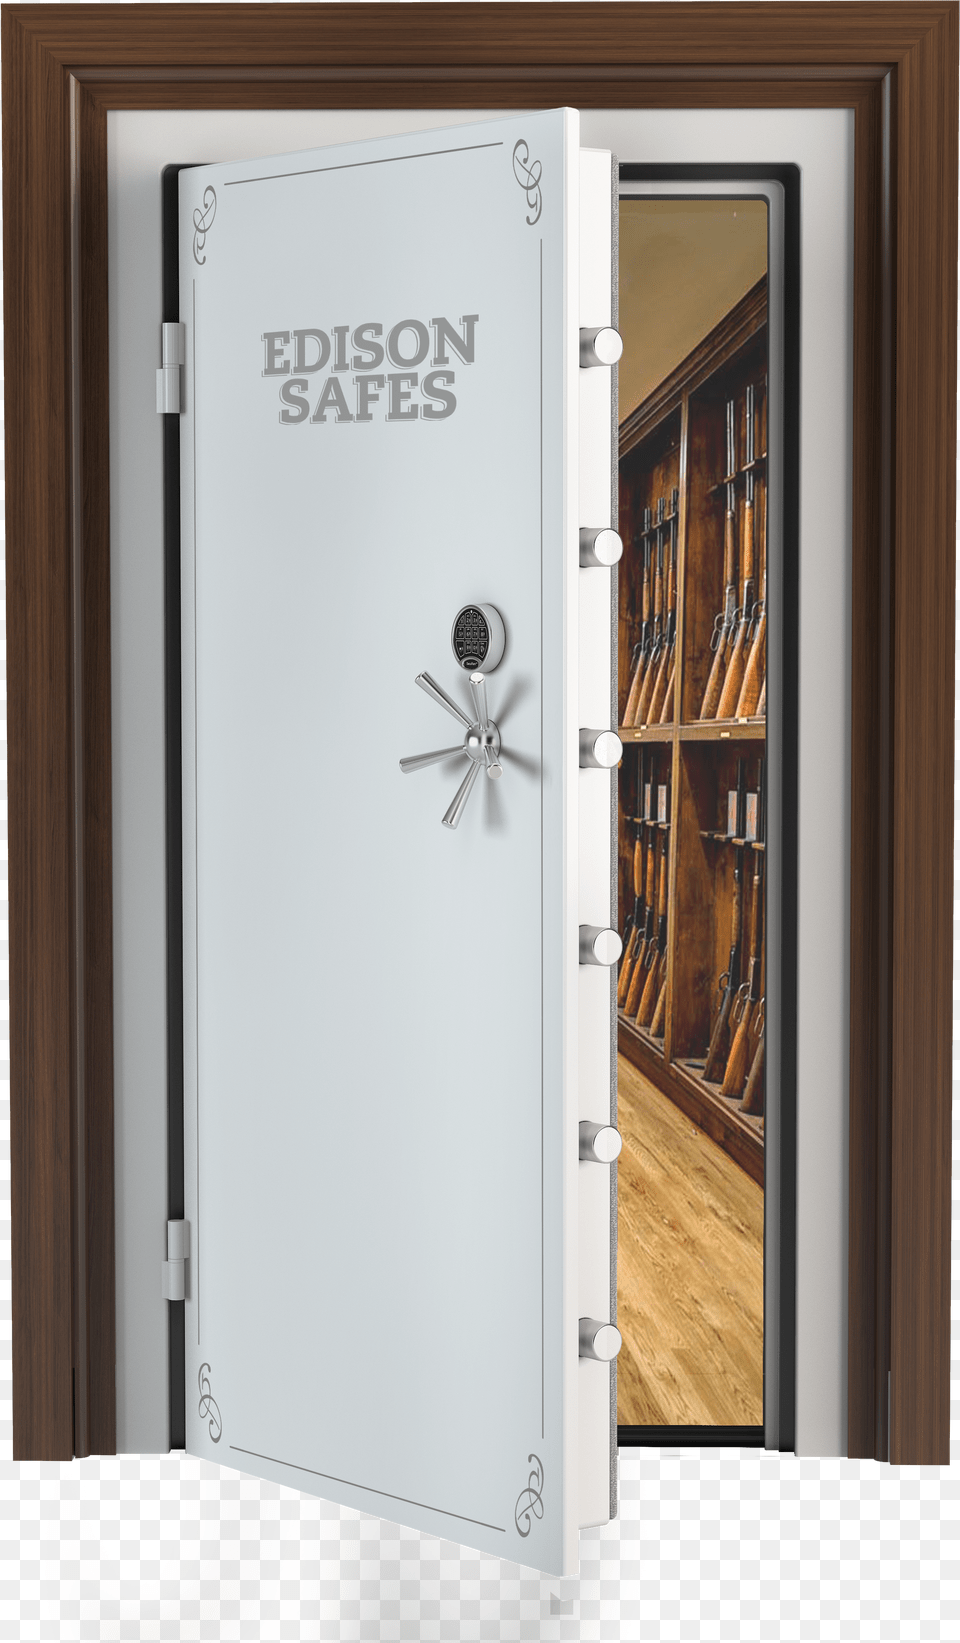 This Edison Vault Door Is Available In Many Different Door Free Png